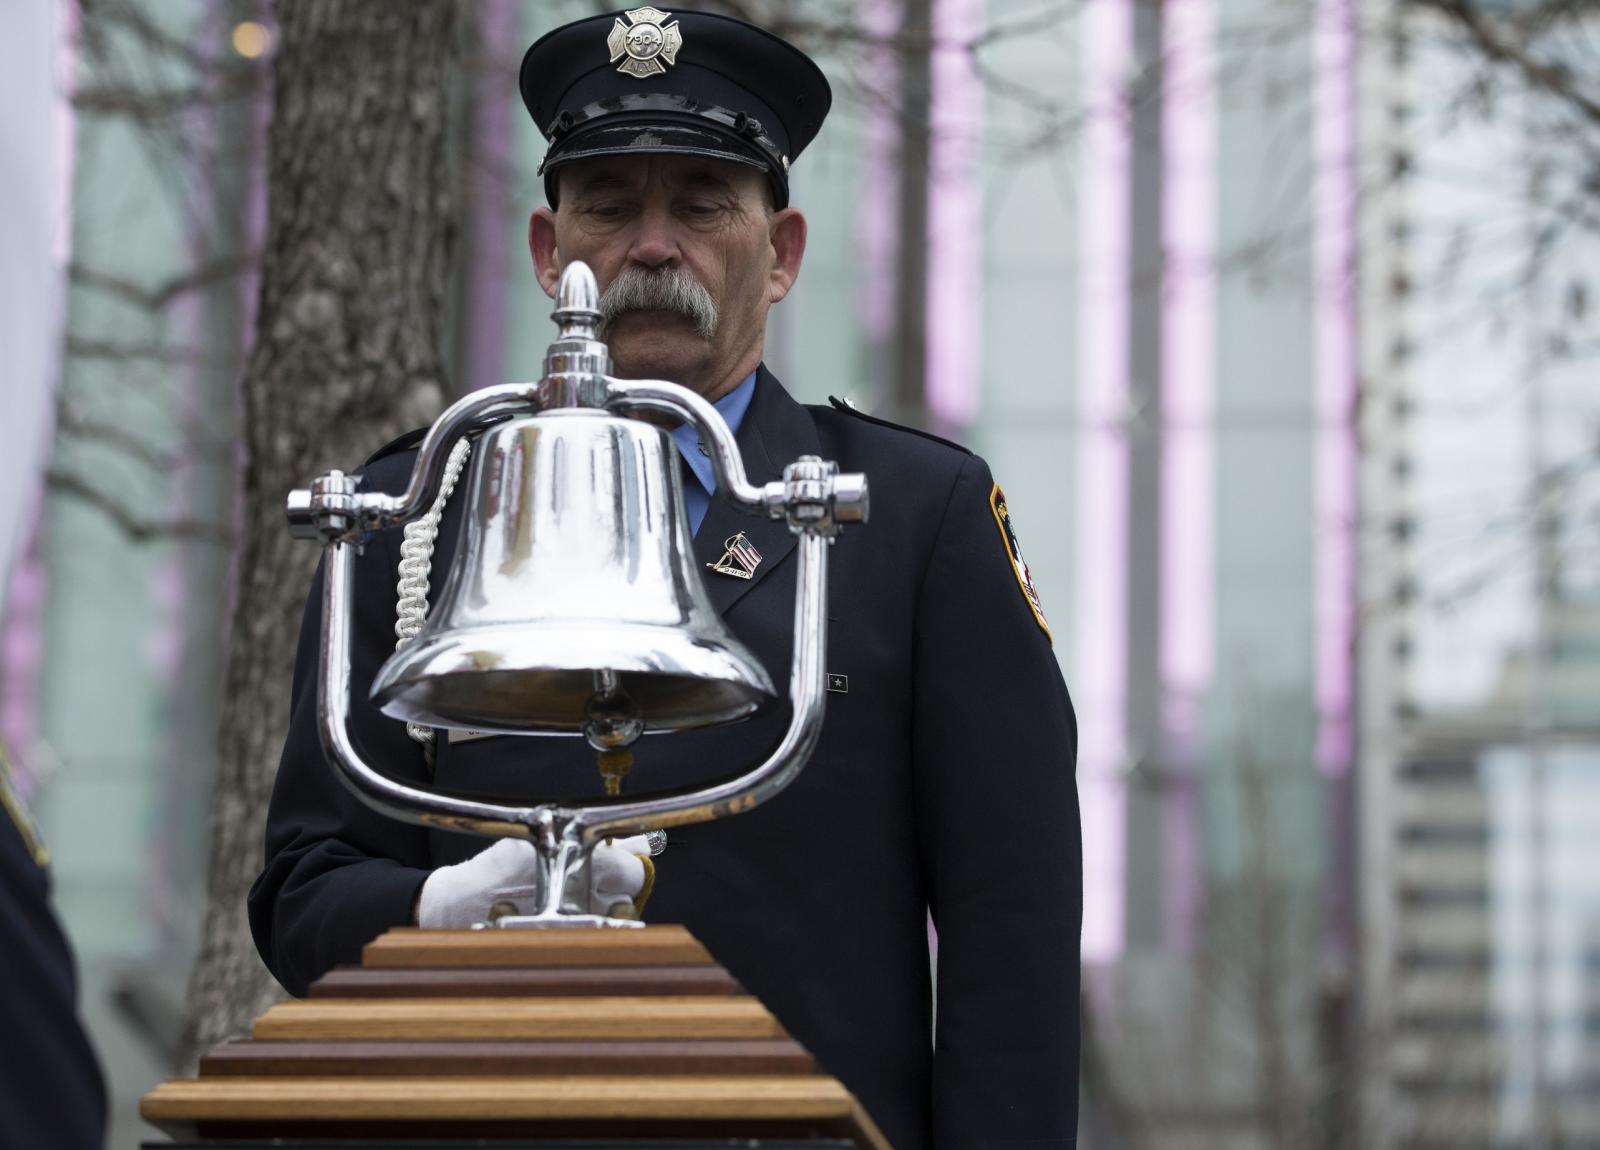 Firefighter with mustache, in formal uniform, stands in front of a silver bell